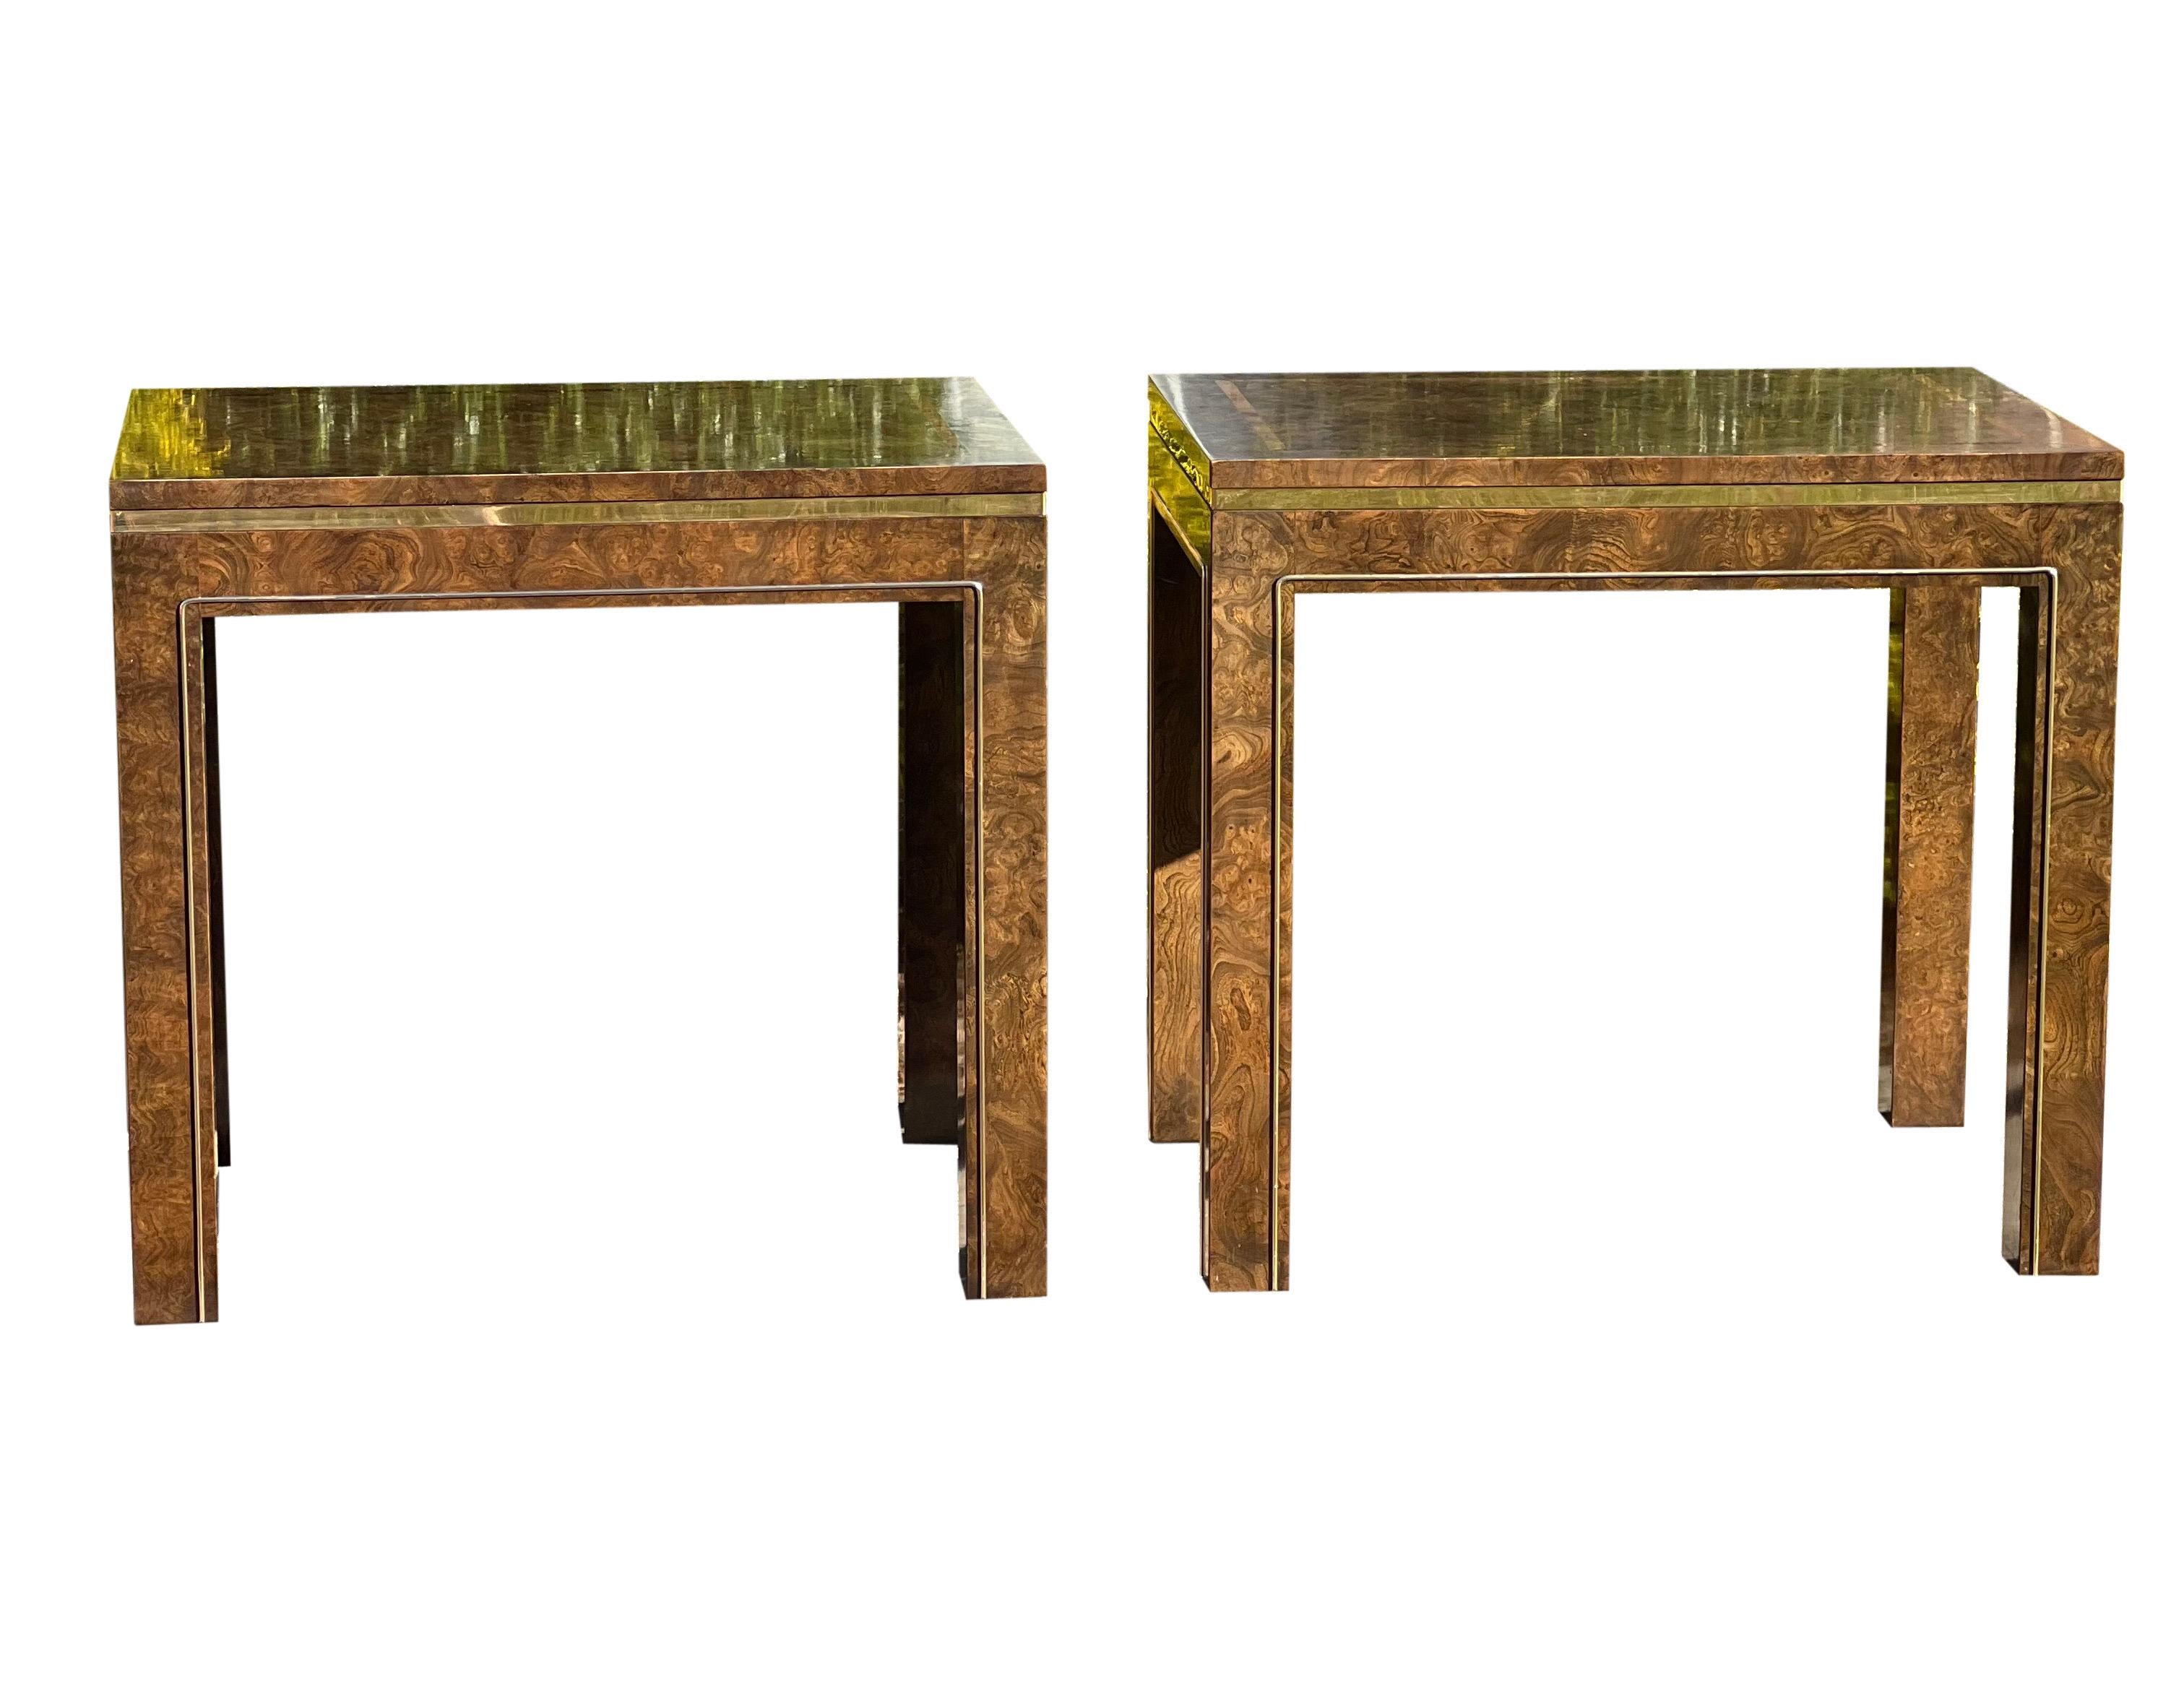 Stately pair of Parsons style Hollywood Regency burl wood side/end tables by Mastercraft, 1960's. The pair features burl veneer throughout with brass accent trim. Tables are rectangular in shape. An elegant and stunning pair in good vintage